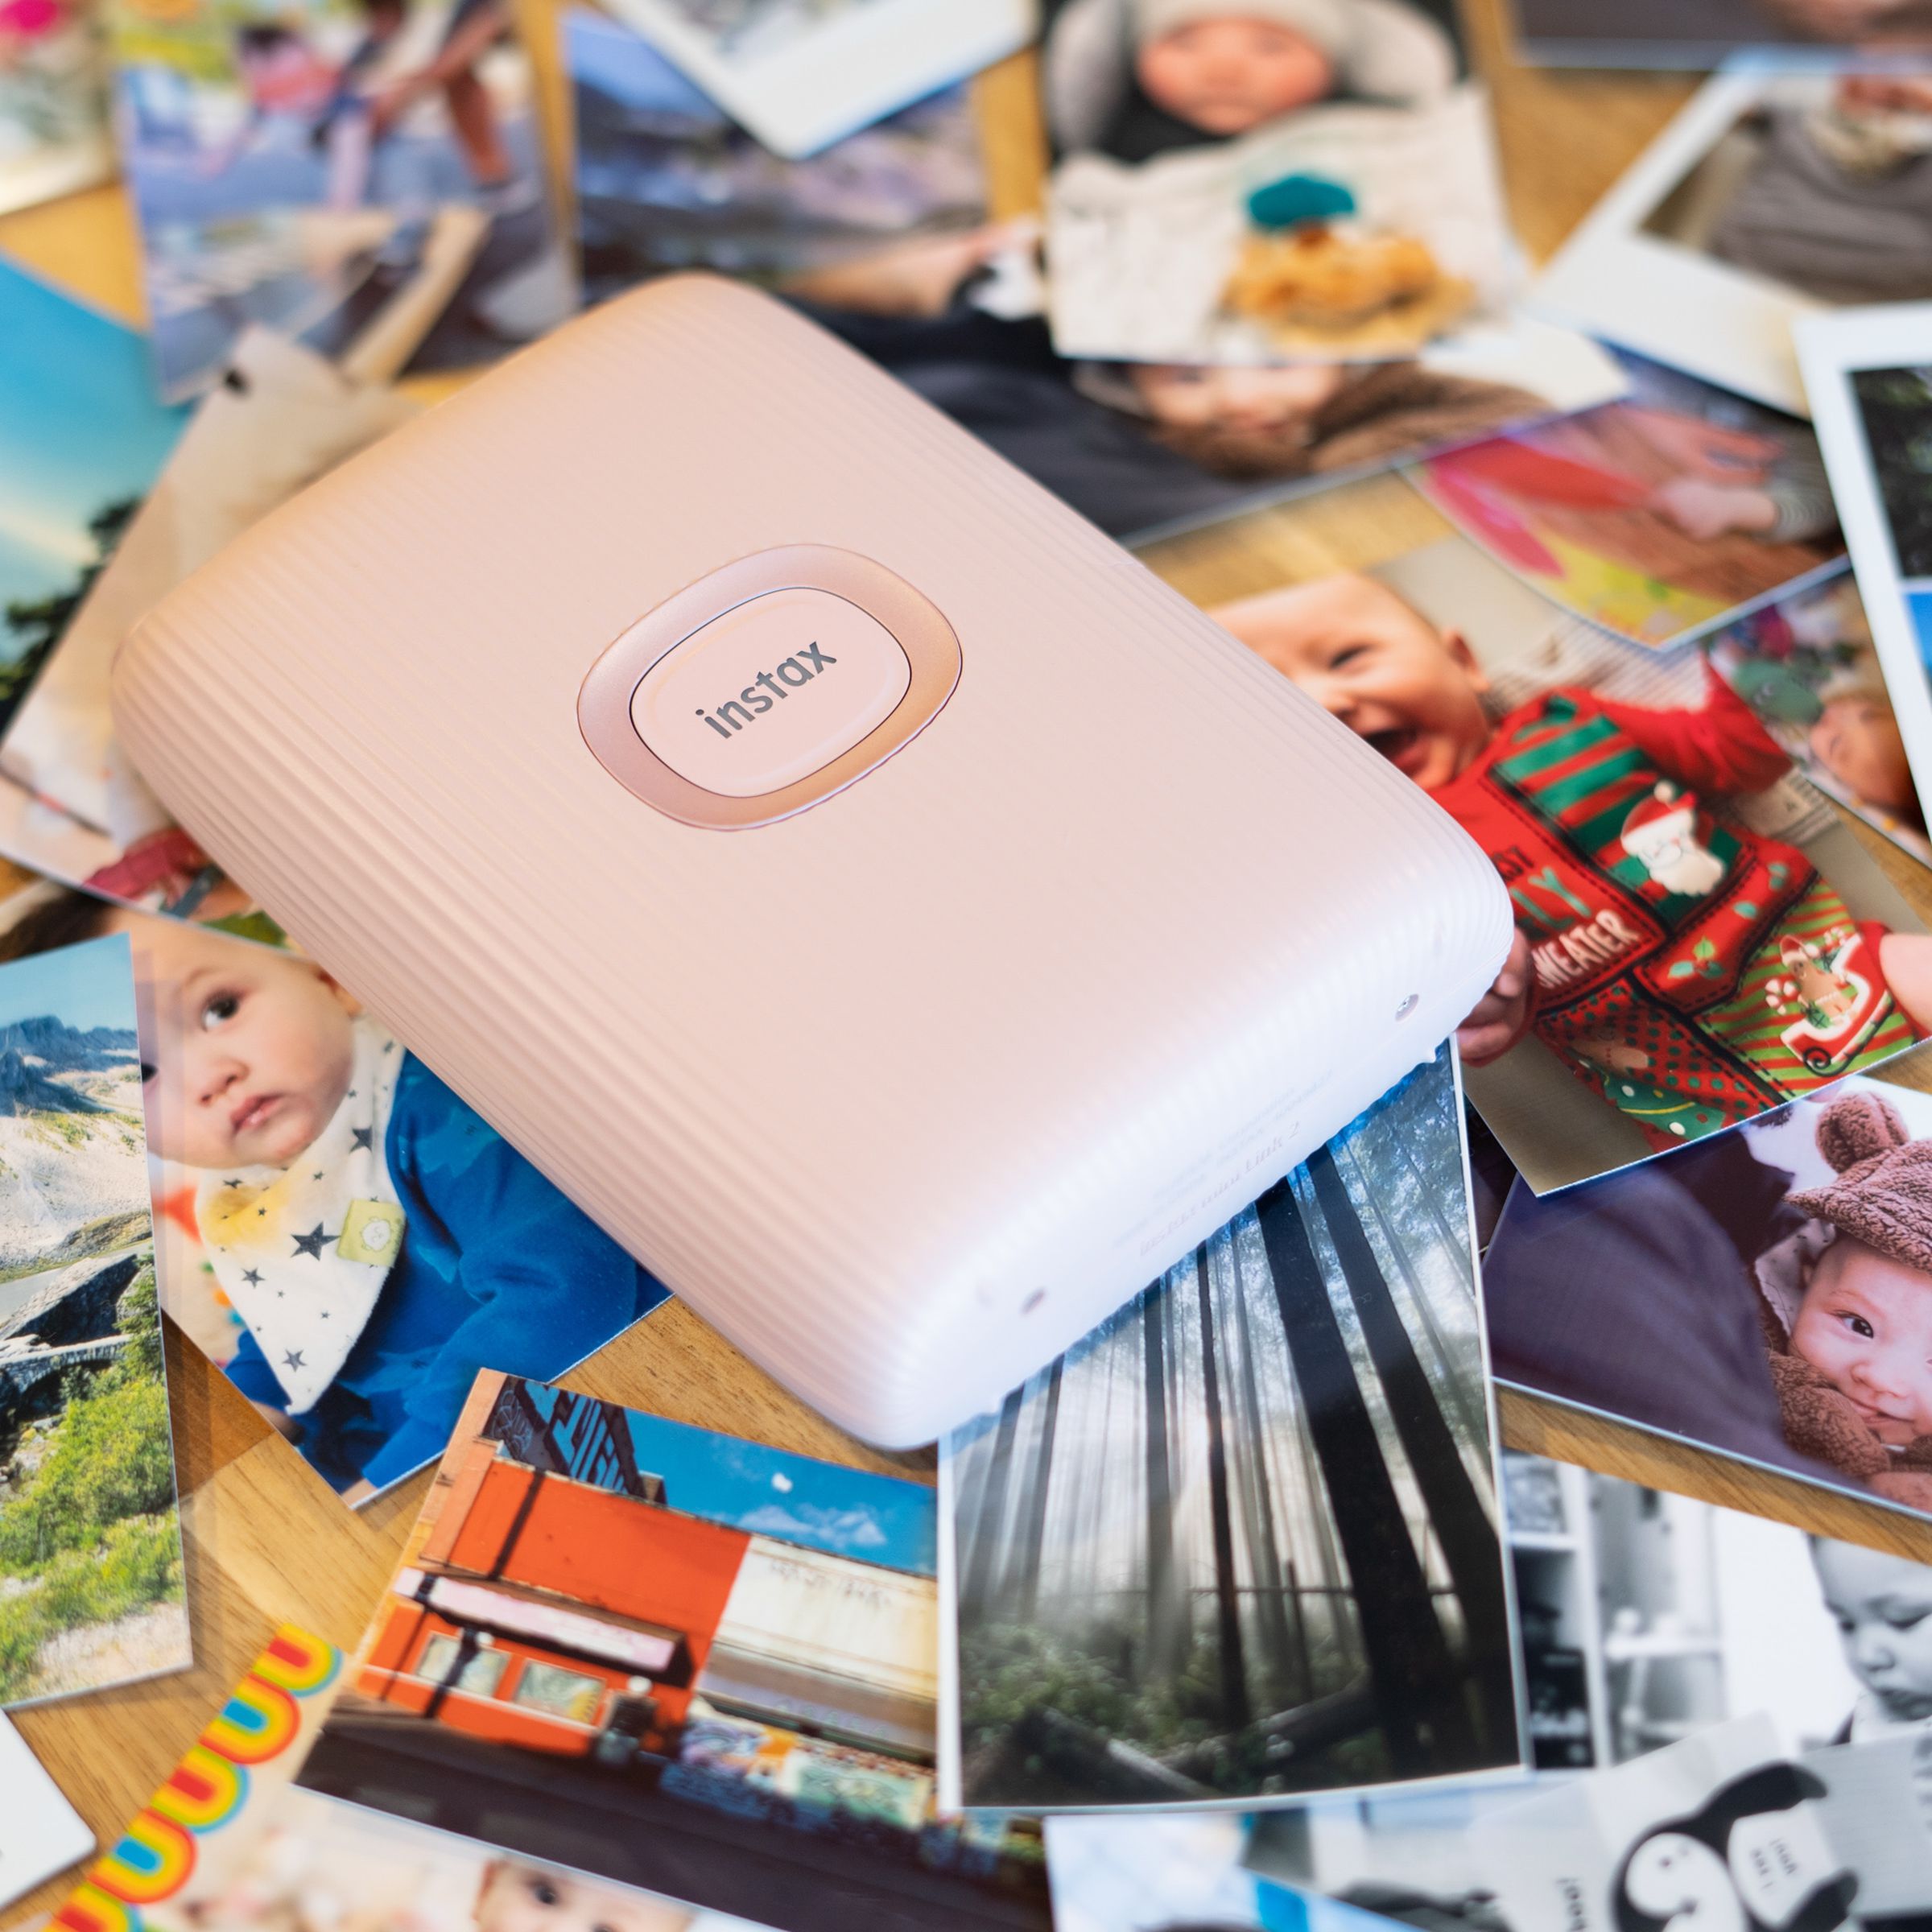 Instax Mini Link 2 on a backdrop of printed photos.